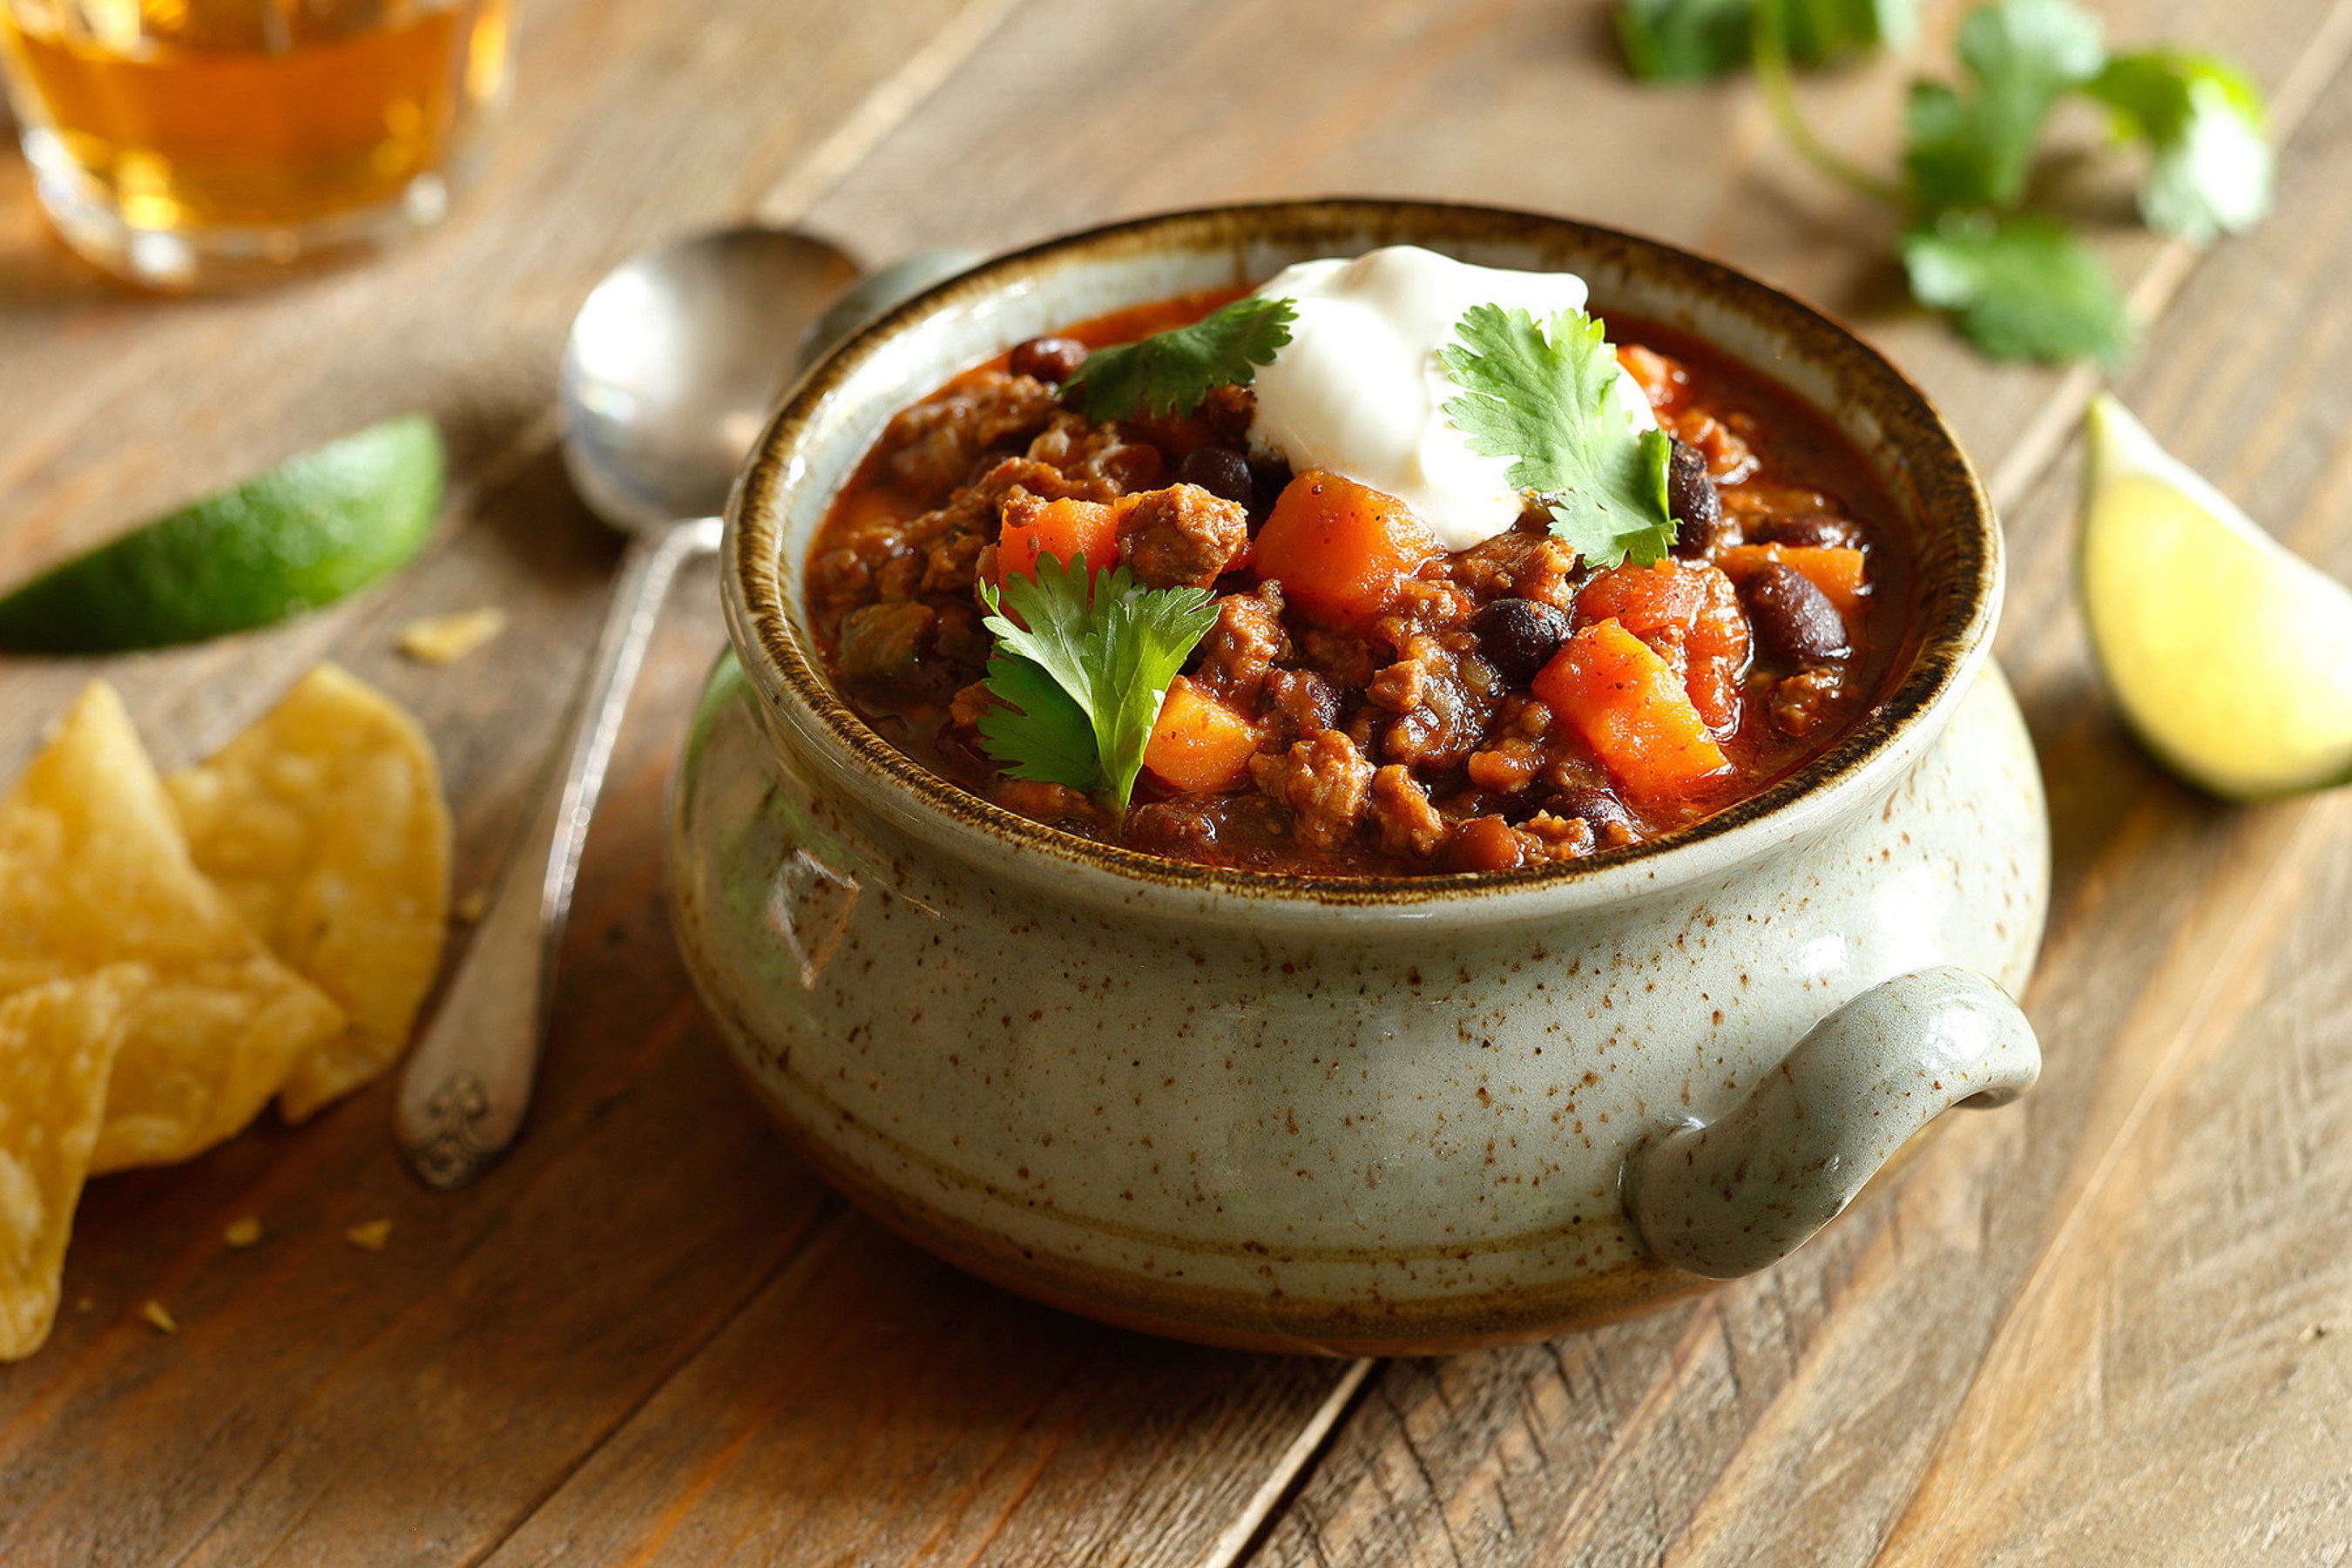 Lamb Chili with Sweet Potatoes, Black Beans, and Poblanos - See more at: http://www.americanlamb.com/consumer/lamb-chili-with-sweet-potatoes-black-beans-and-poblanos/#sthash.5nCx8P9f.dpuf